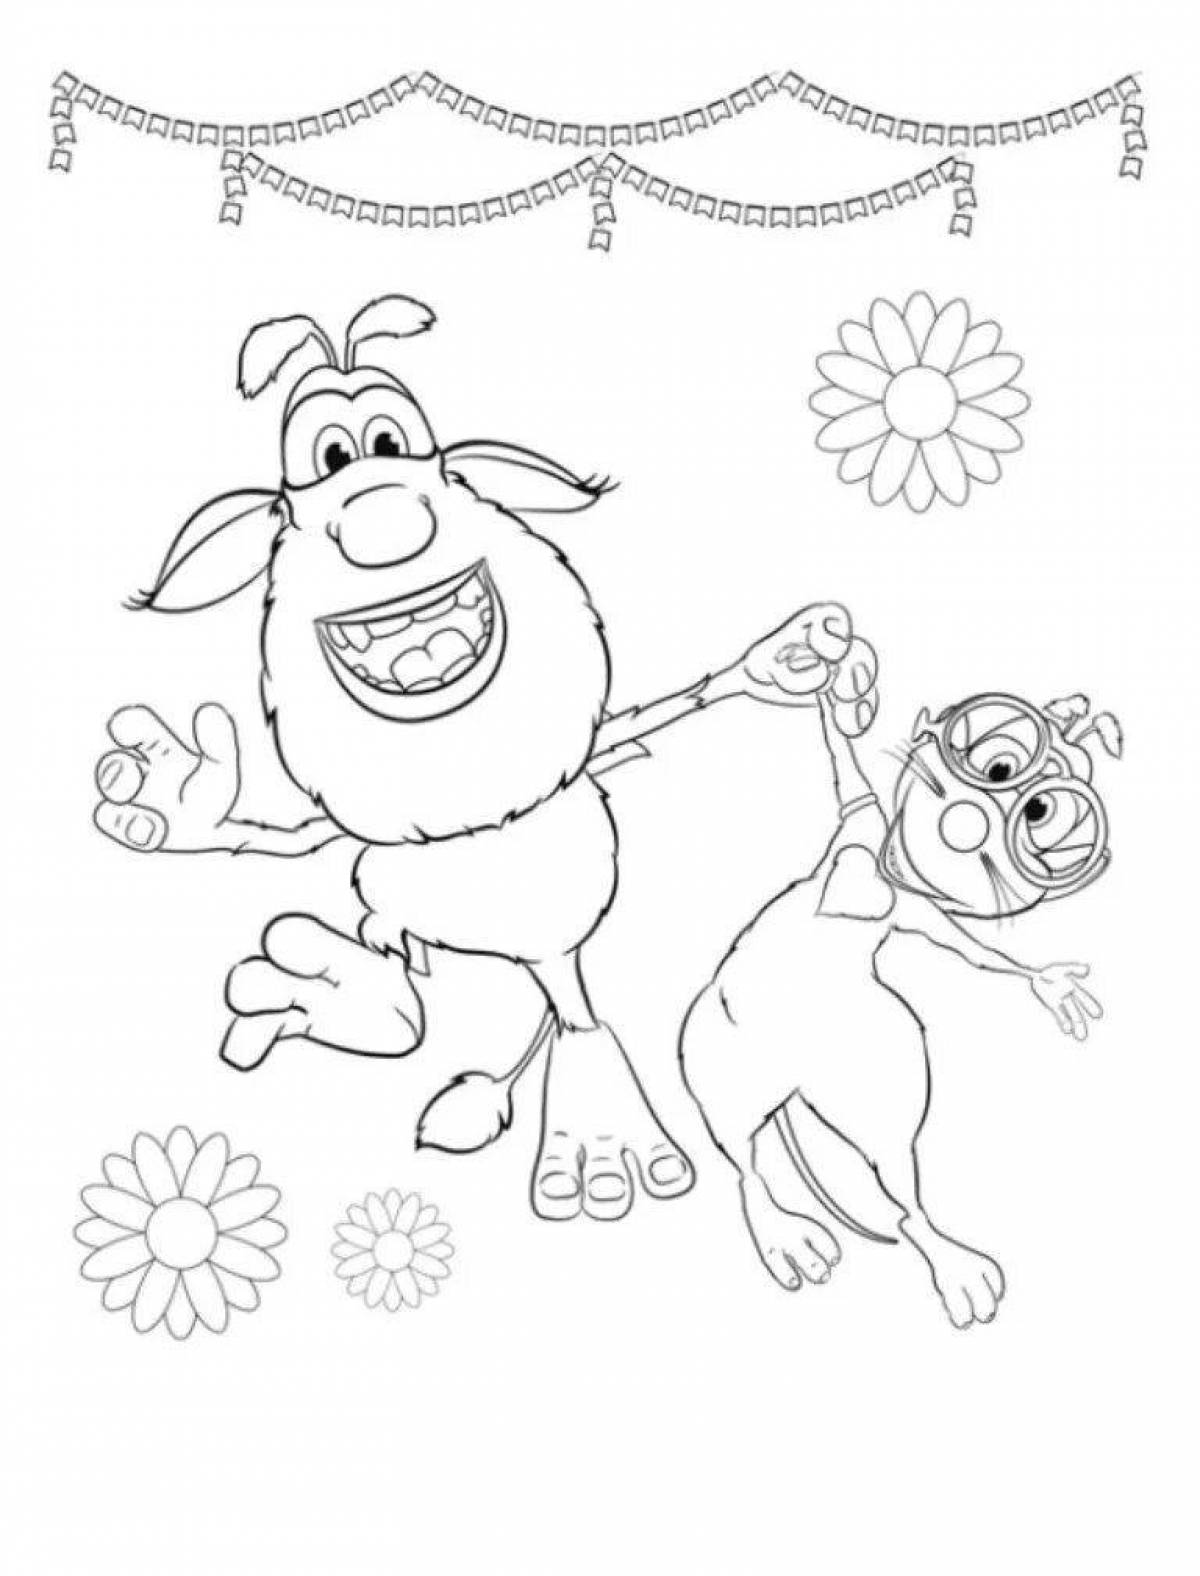 Fancy buba and mouse coloring book